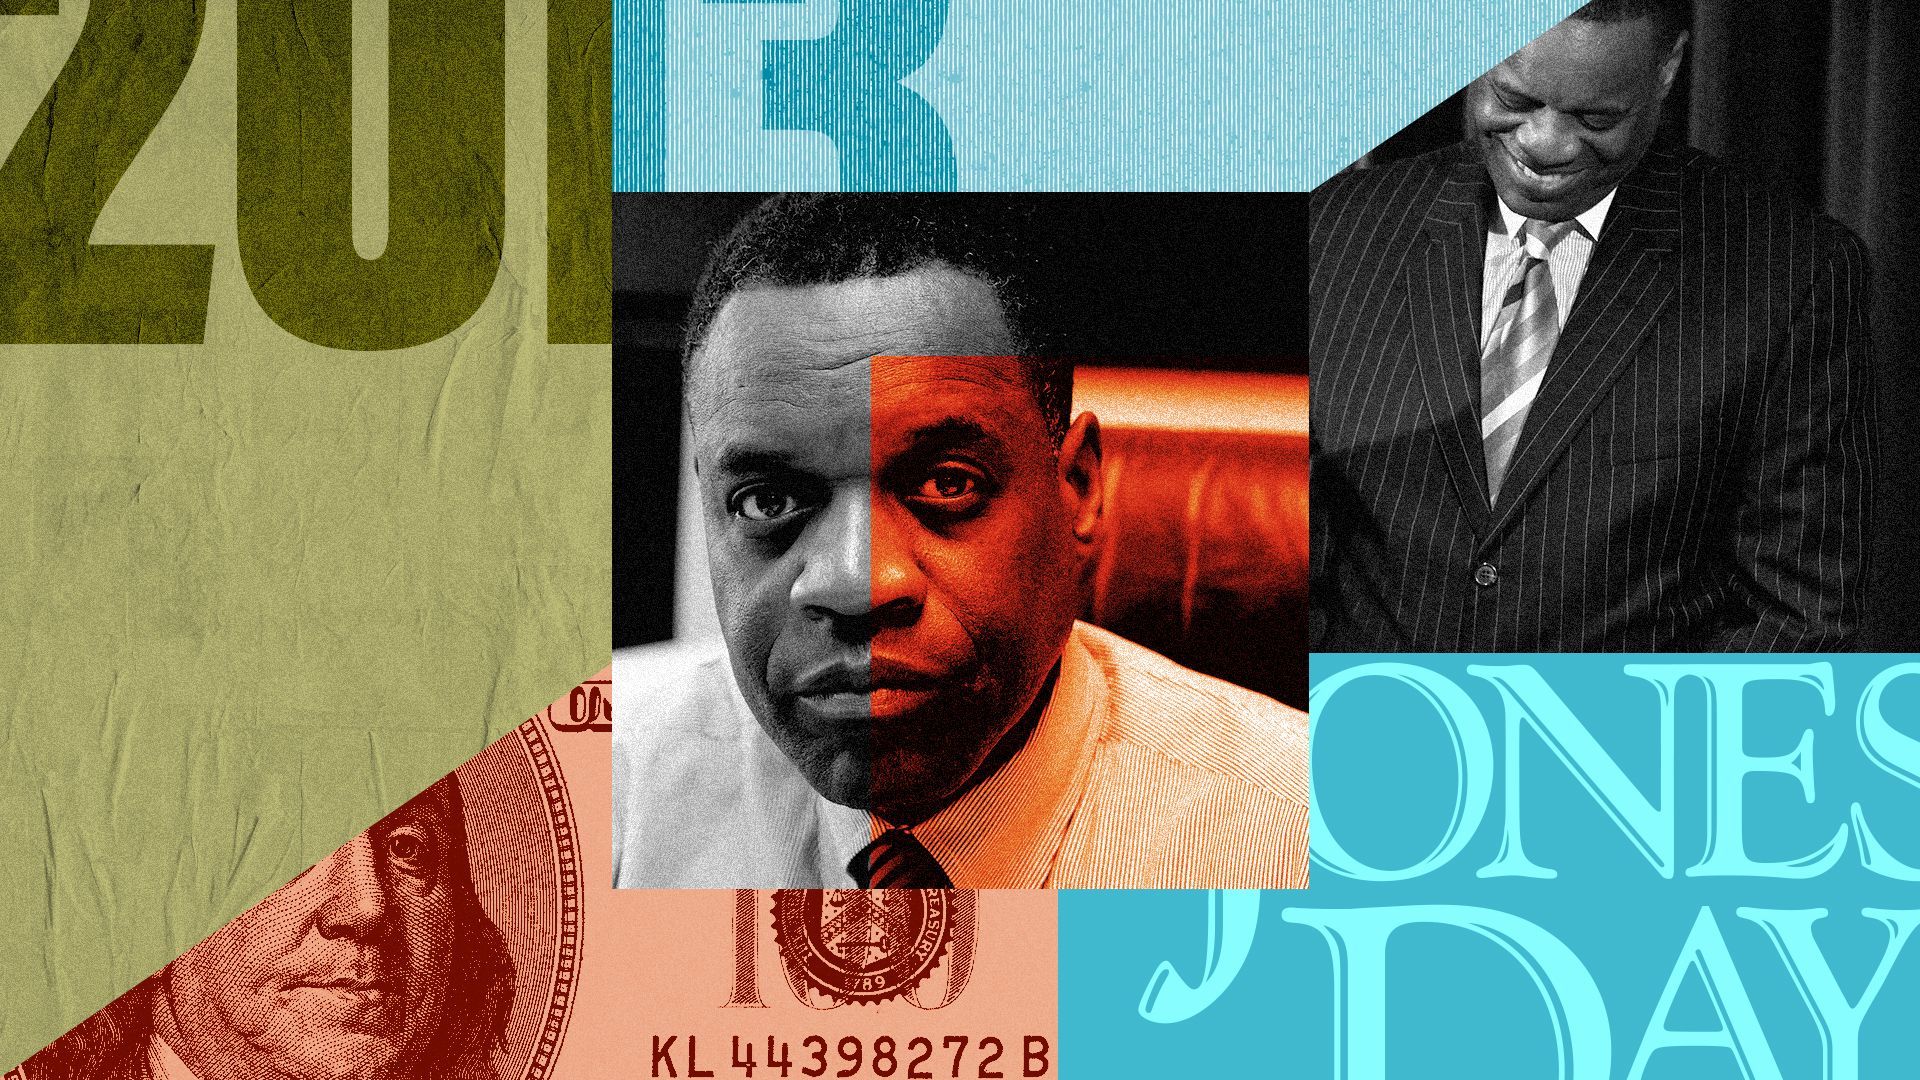 Photo illustration of Kevyn Orr with money, the Jones Day logo, and "2013" within geometric shapes.